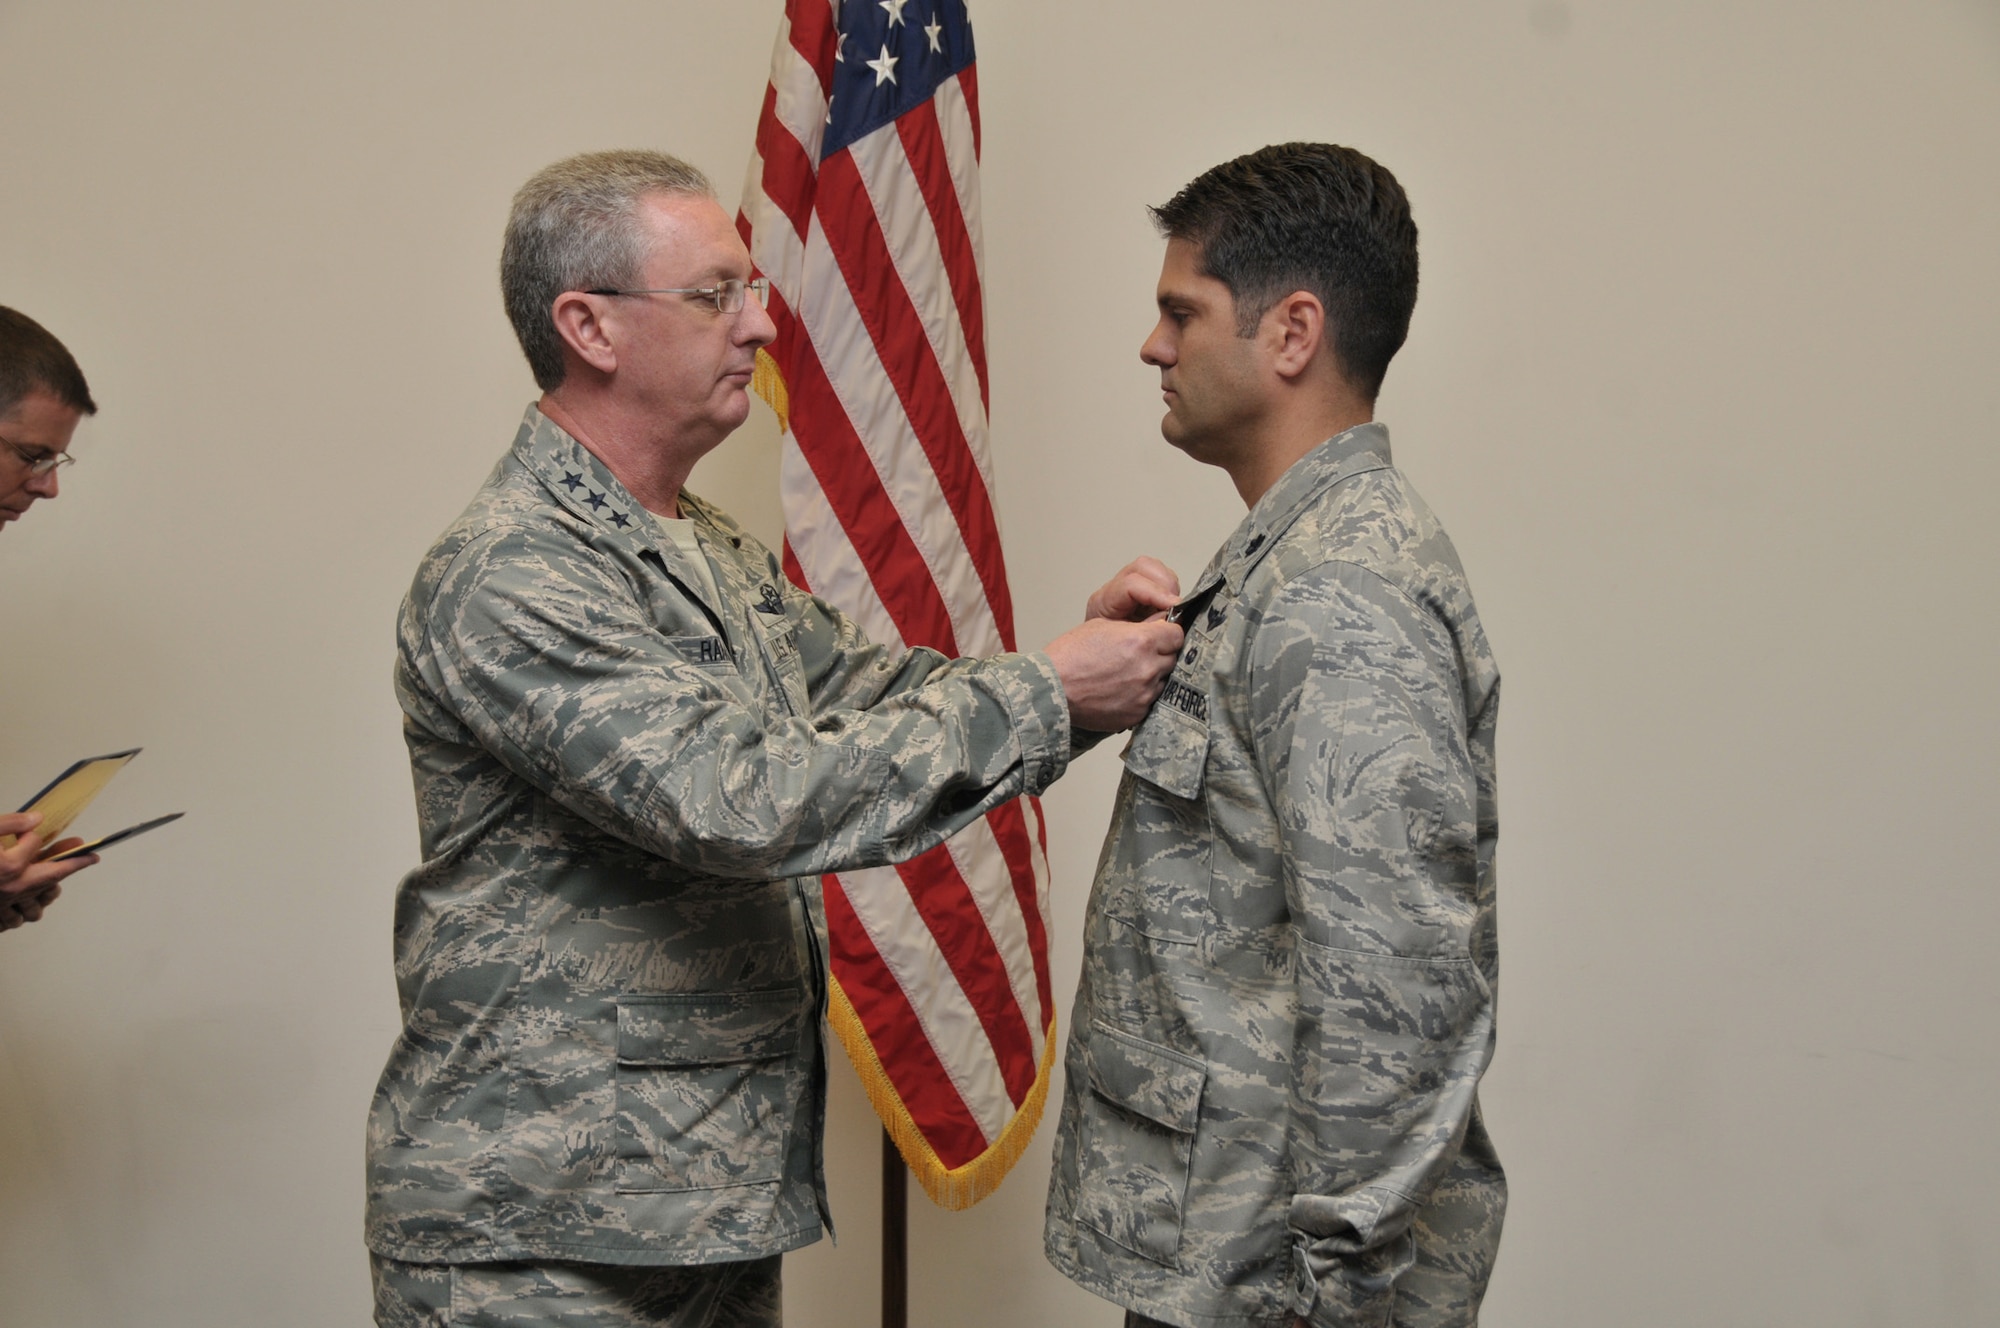 Lt. Col. Douglas Edwards (right), 906th Air Refueling Squadron Commander, receives the Airman’s Medal from Lt. Gen. Mark Ramsay, 18th Air Force Commander, in a ceremony at Scott AFB, IL on May 21, 2012.  Edwards received the award for rescuing an elderly woman from a burning vehicle on Nov. 2, 2009 near King Hill, Idaho.  With complete disregard for his own safety, Edwards succeeded in freeing the injured and trapped victim from her car just moments before the entire vehicle became engulfed in flames.  Local Sheriff Deputies responded within eight minutes of the initial 9-1-1 call about the accident and later told Edwards the victim would have been burned alive if he hadn’t acted so quickly.  (U.S. Air Force photo by Master Sgt. Franklin Hayes)